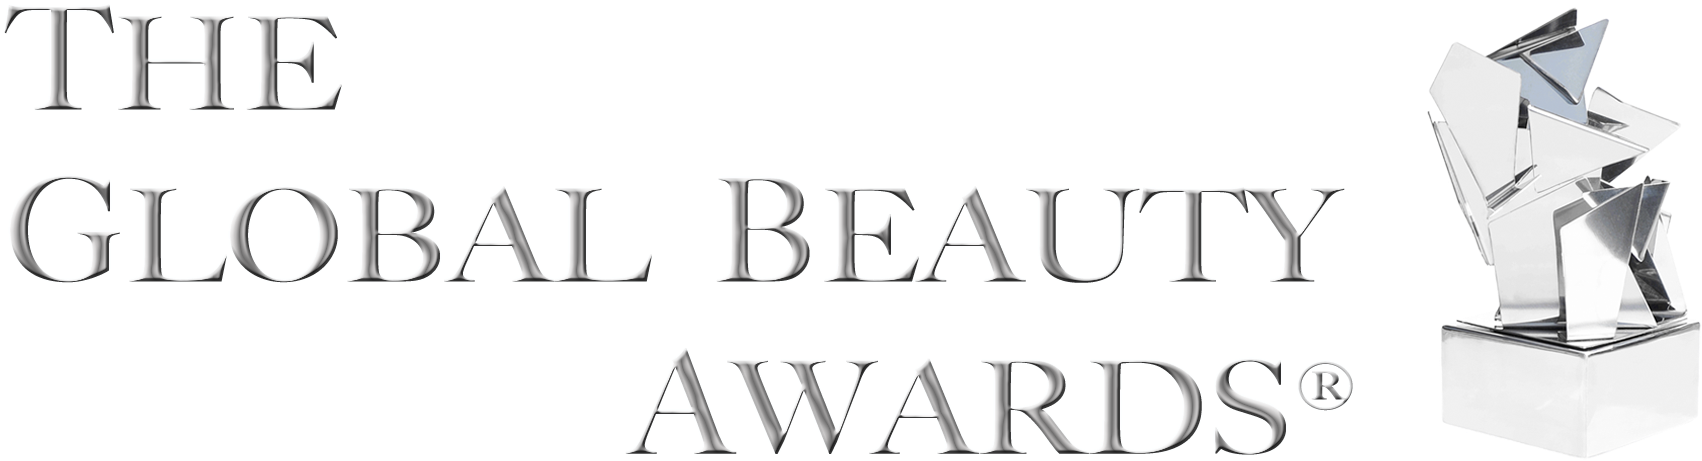 The Global Beauty Awards Logo - Global Beauty Awards (1830x570), Png Download